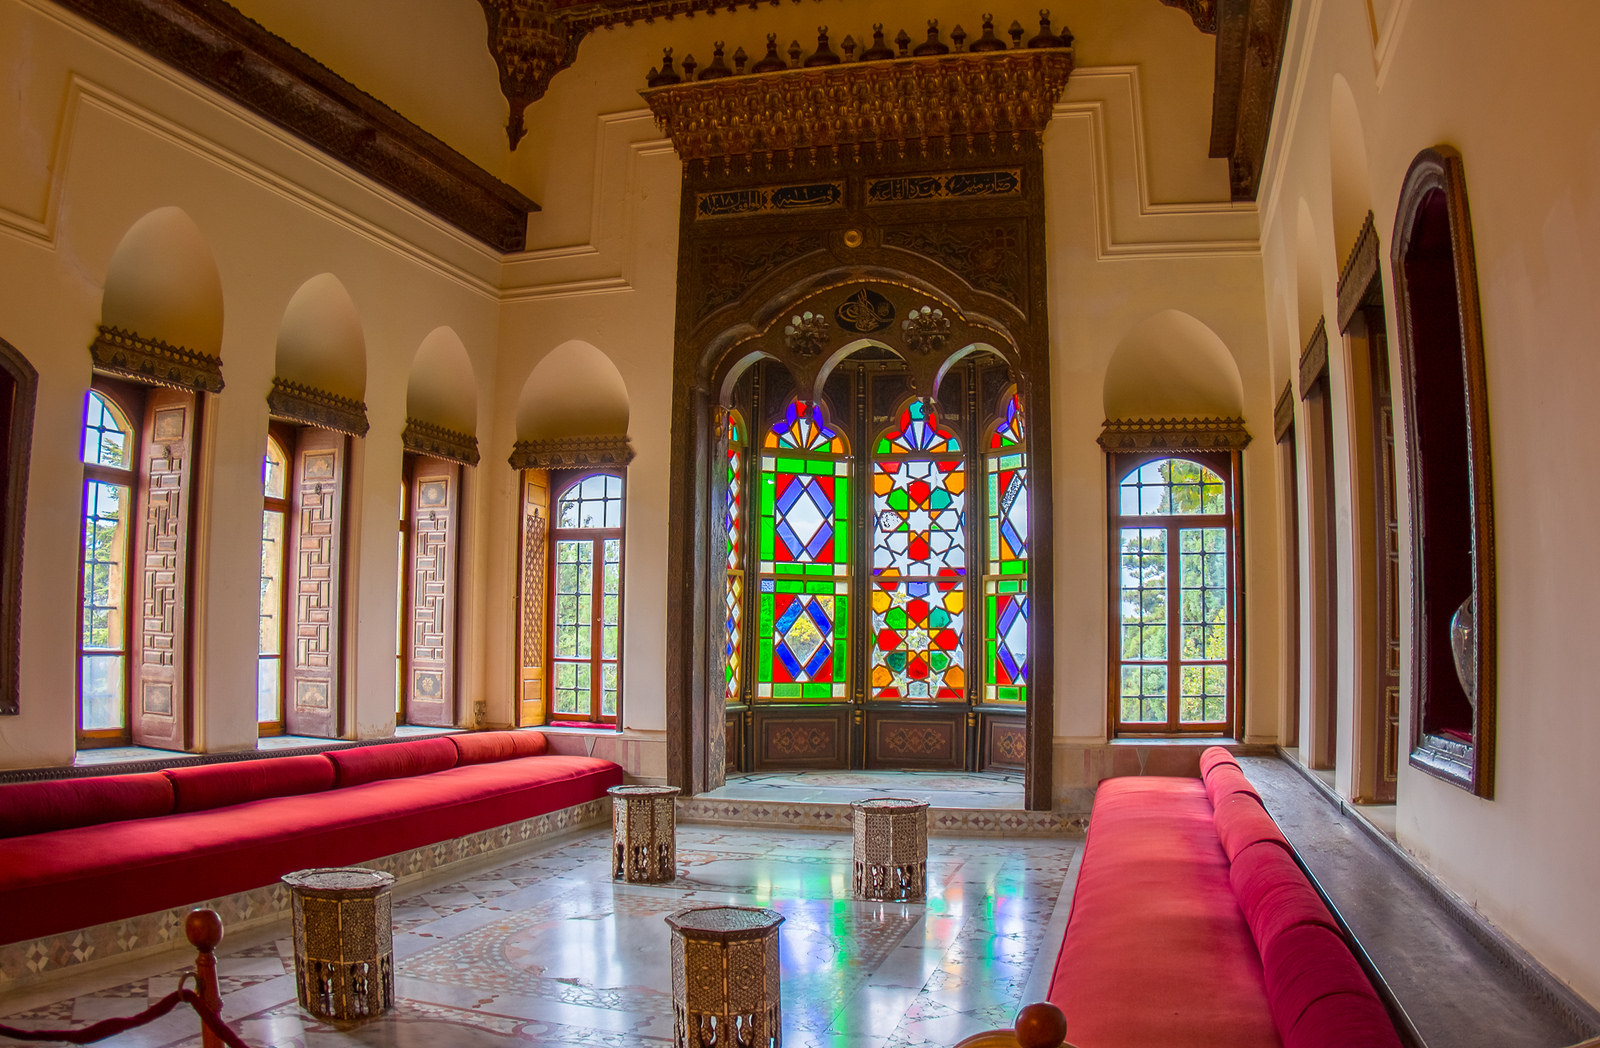 Local Guides Connect - Take a tour of the Beiteddine palace in Lebanon -  Local Guides Connect